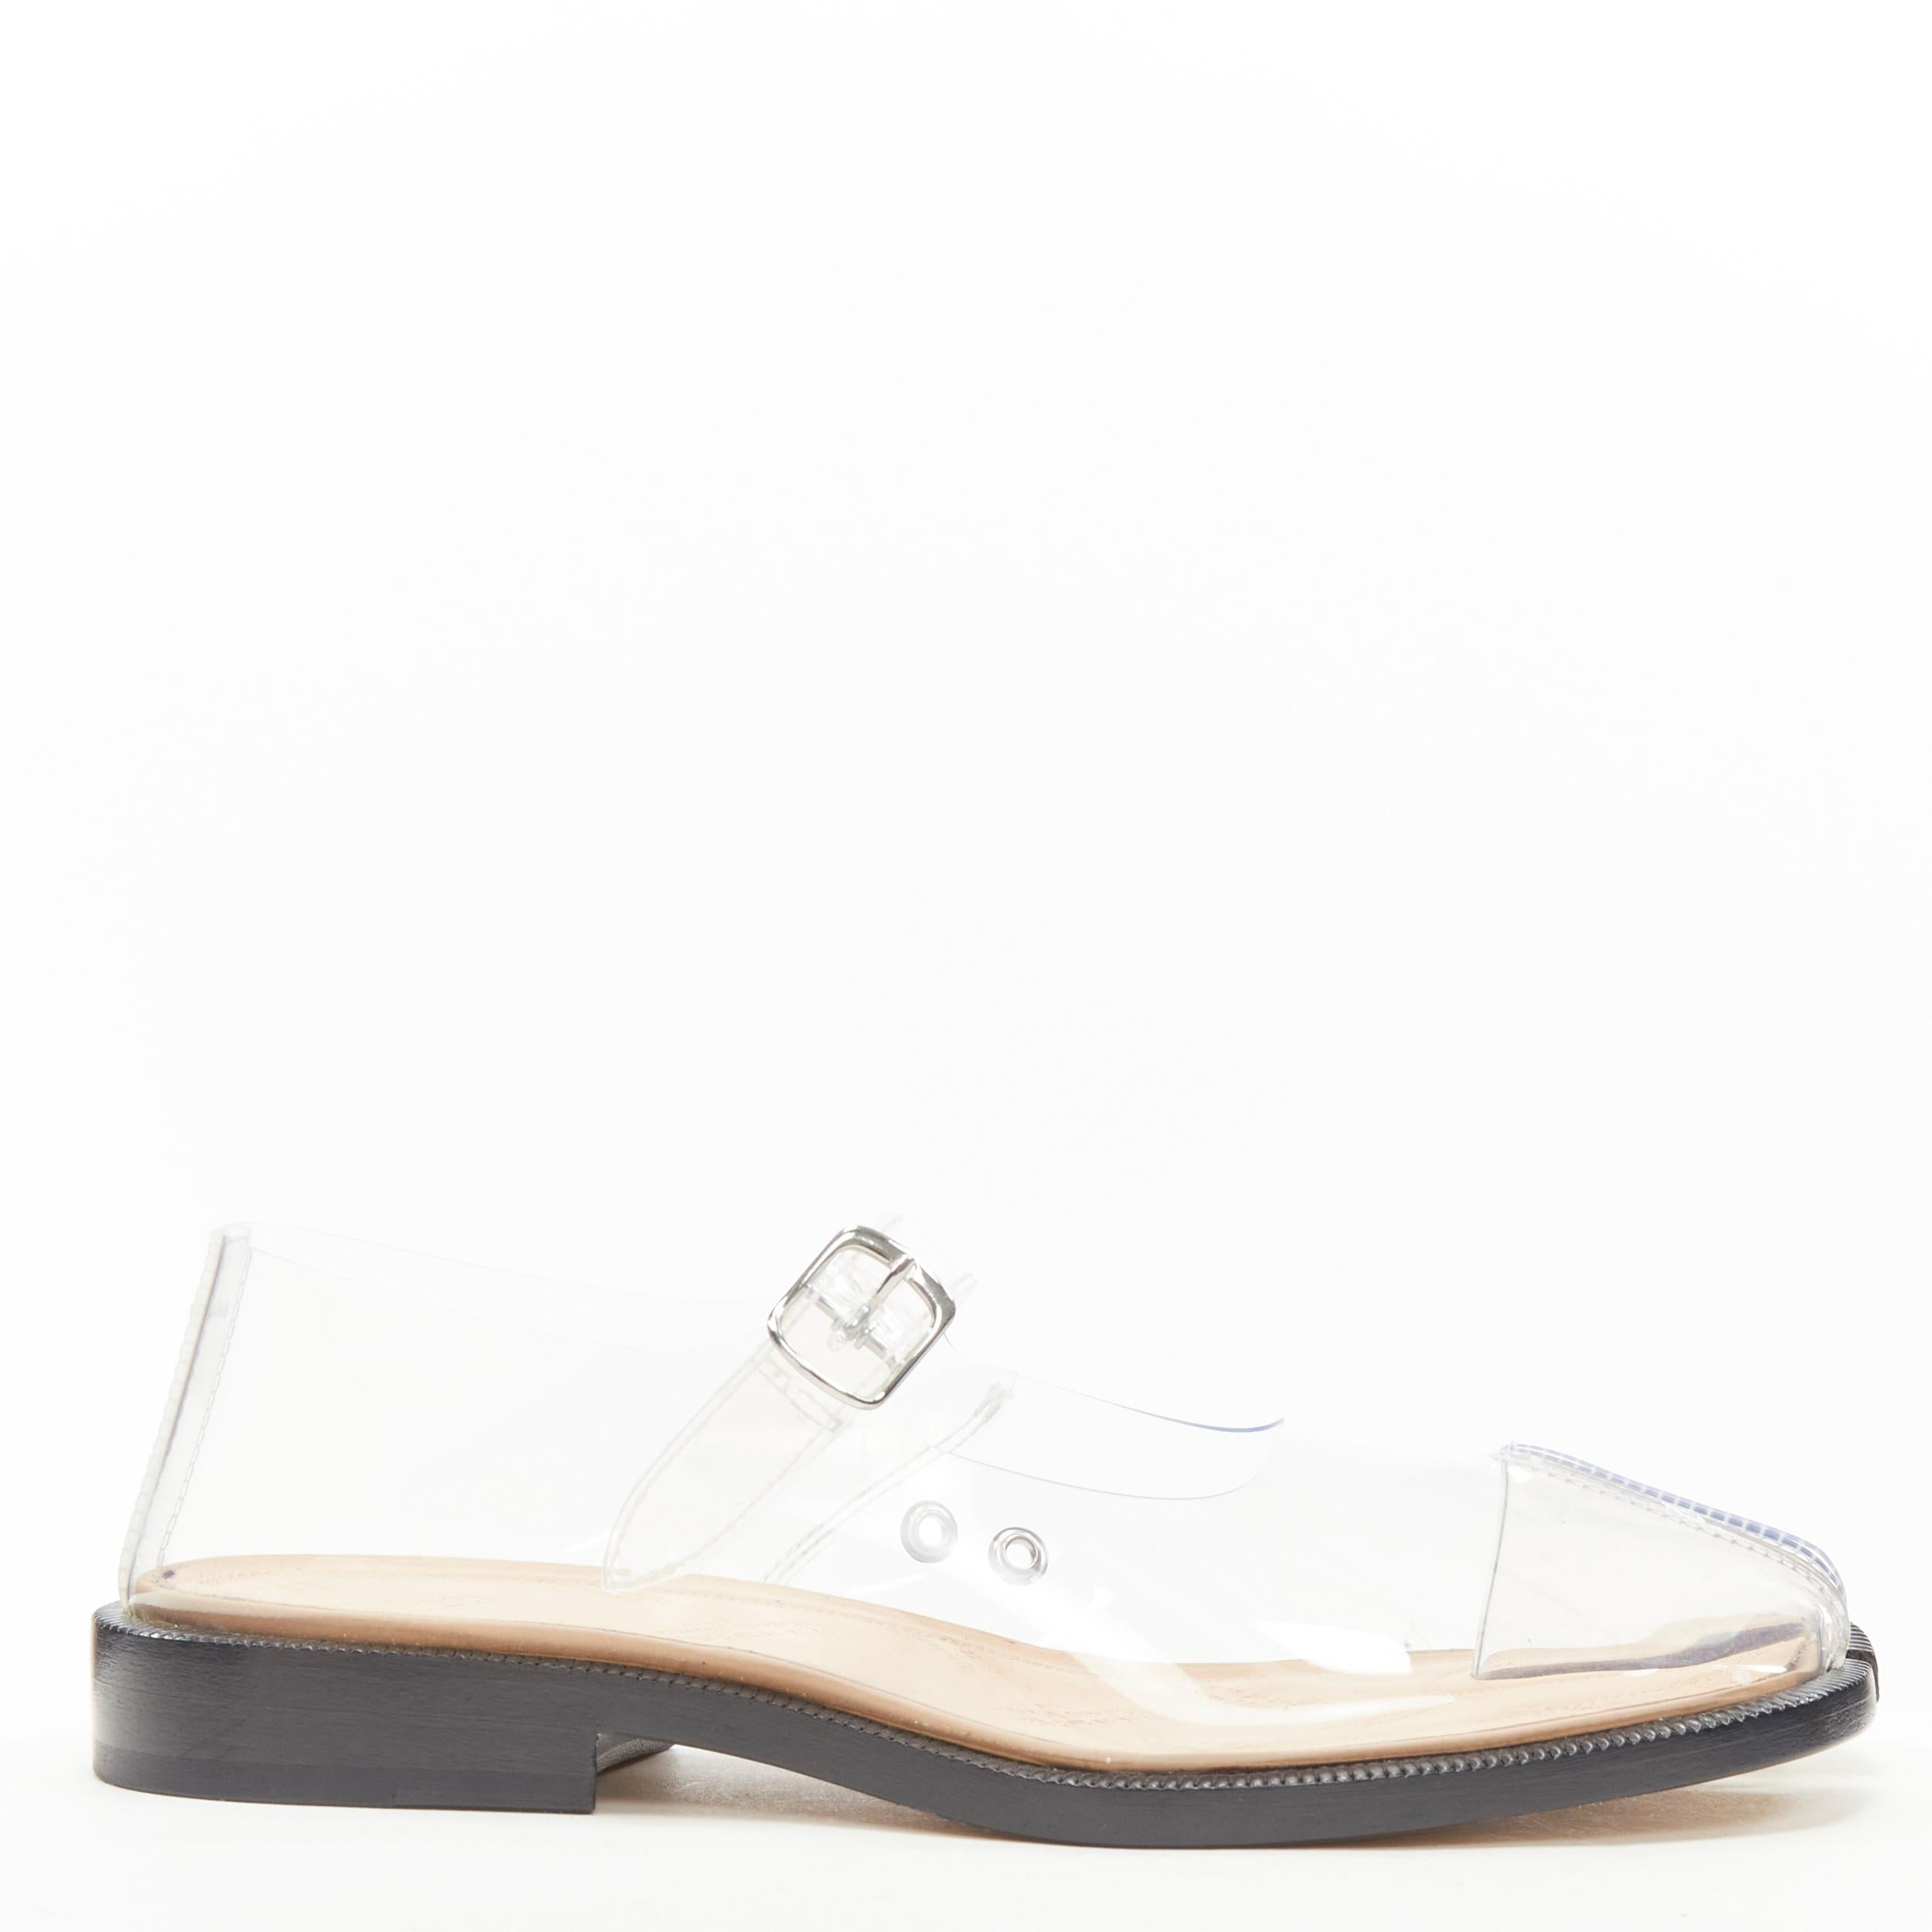 new MAISON MARGIELA Tabi PVC transparent clear mary jane flats EU38 
Reference: TGAS/C00643 
Brand: Maison Margiela 
Designer: John Galliano 
Model: Tabi 
Material: Plastic 
Color: Clear 
Pattern: Solid 
Closure: Ankle Strap 
Extra Detail: PVC